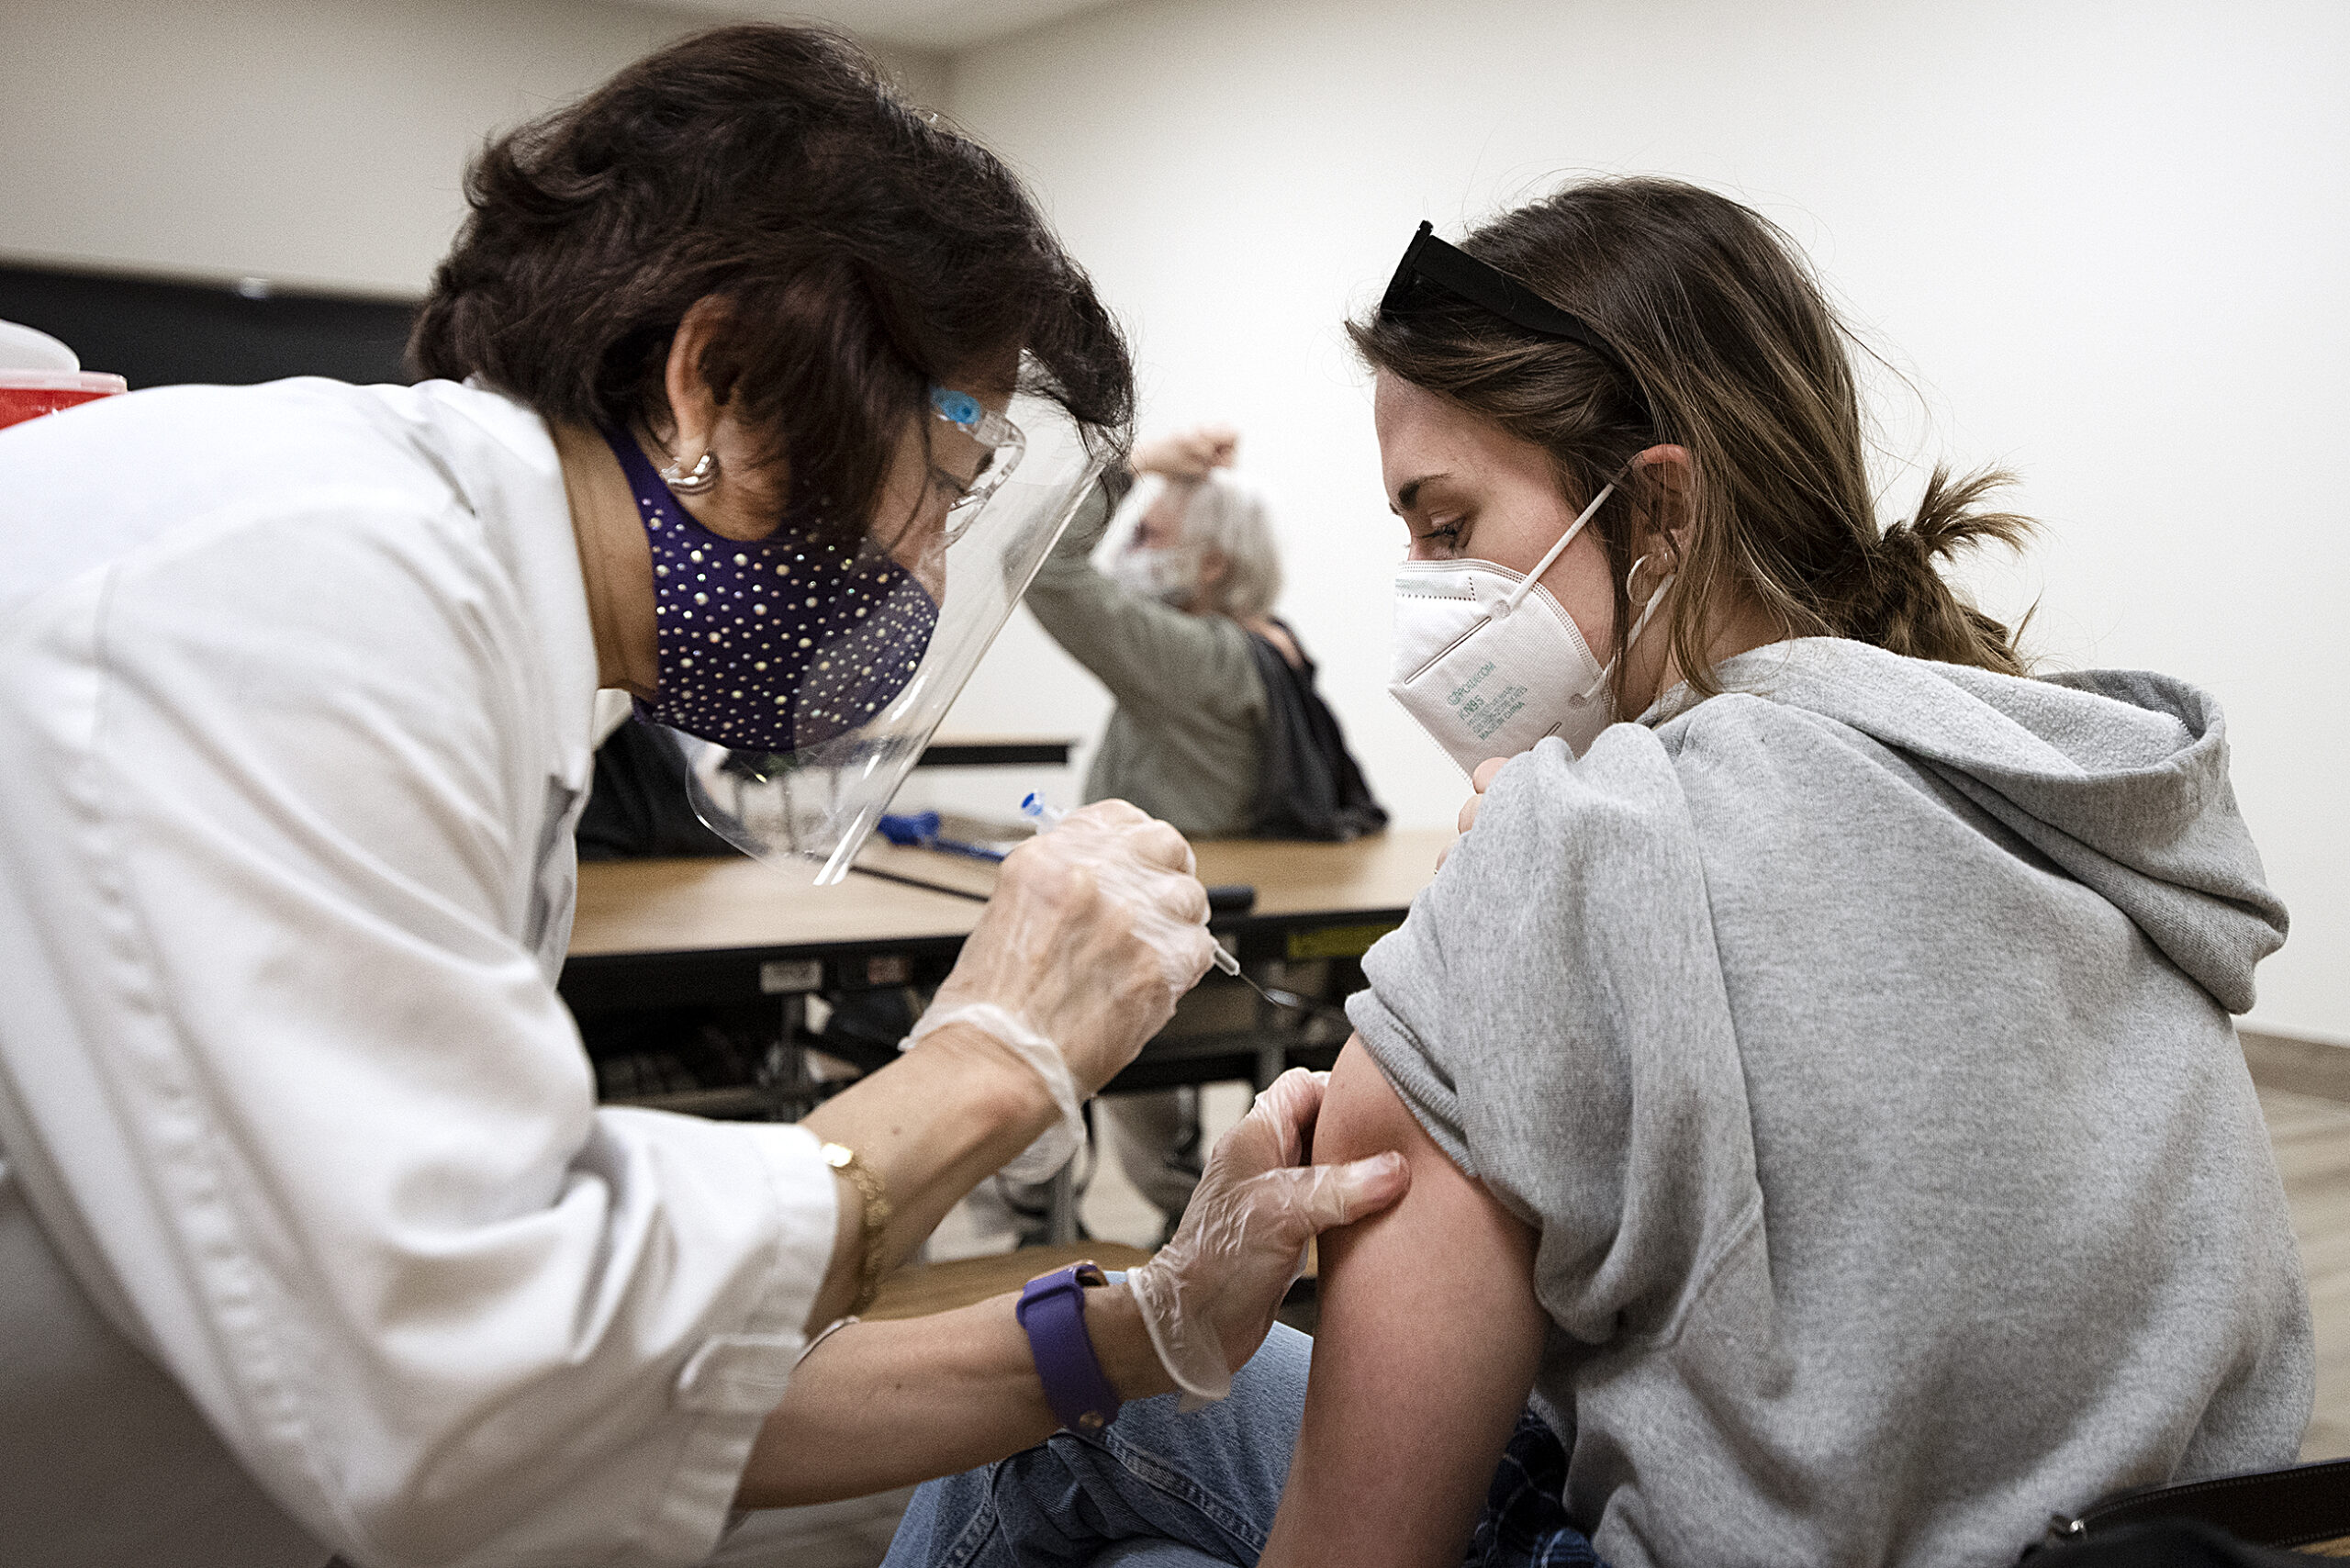 A woman in a face mask looks down at her arm as she receives a shot.